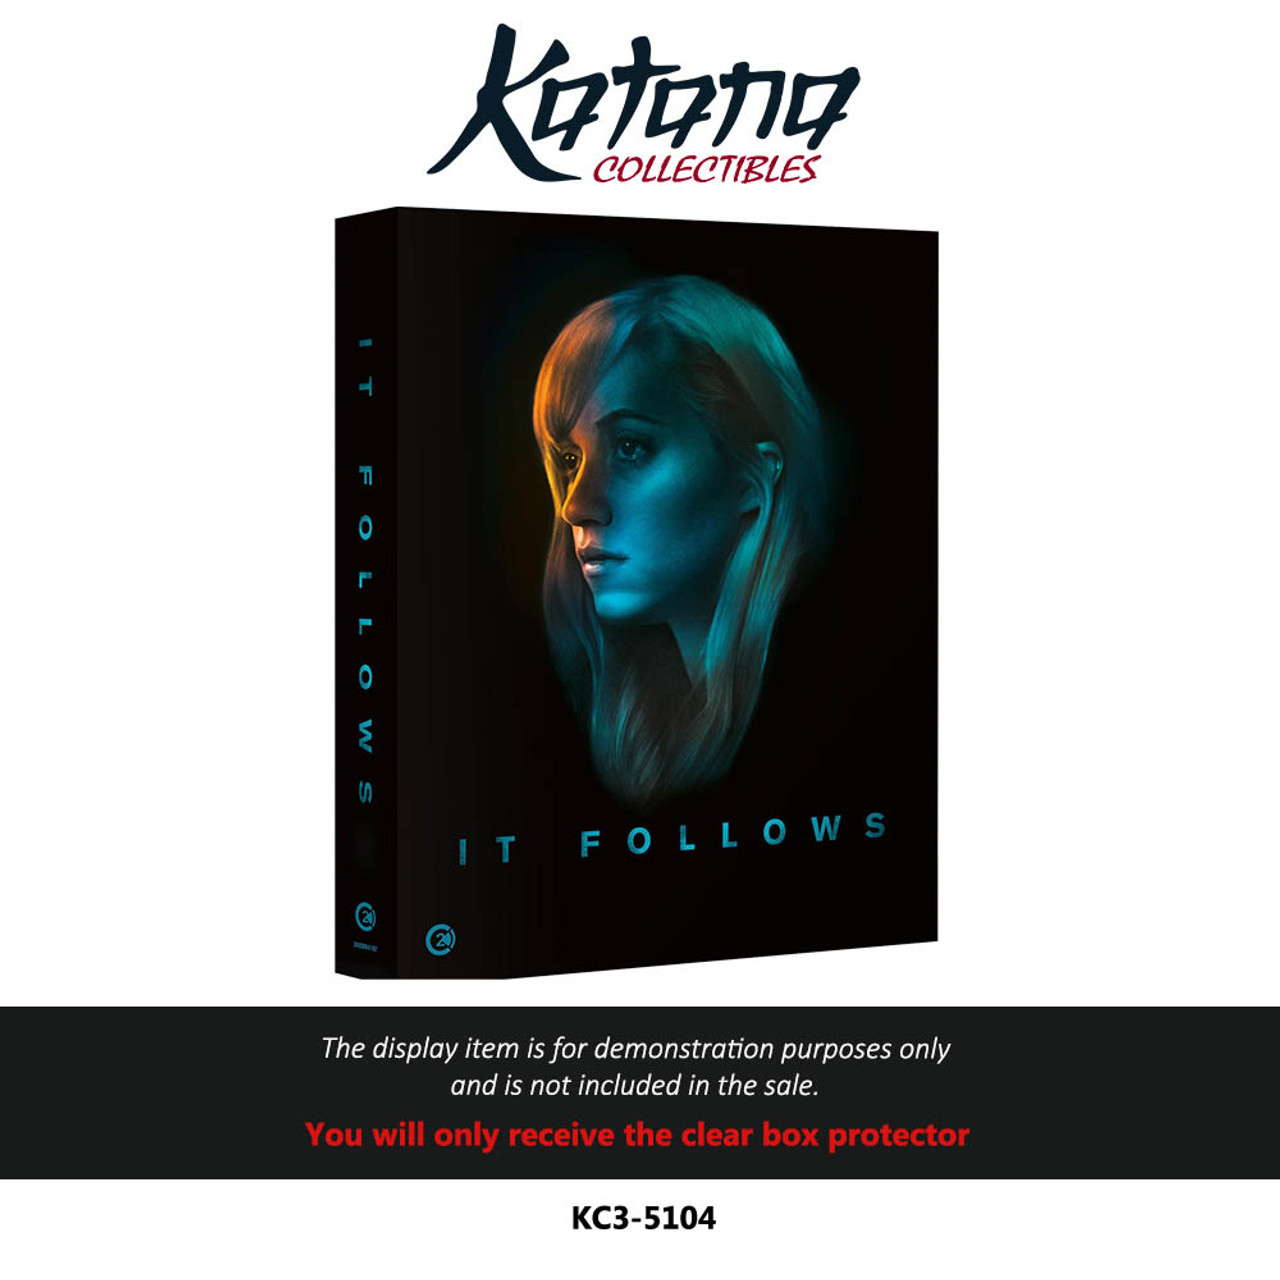 Katana Collectibles Protector For It Follows 4K Blu-ray United Kingdom DigiPack / Limited Edition By SECOND SIGHT